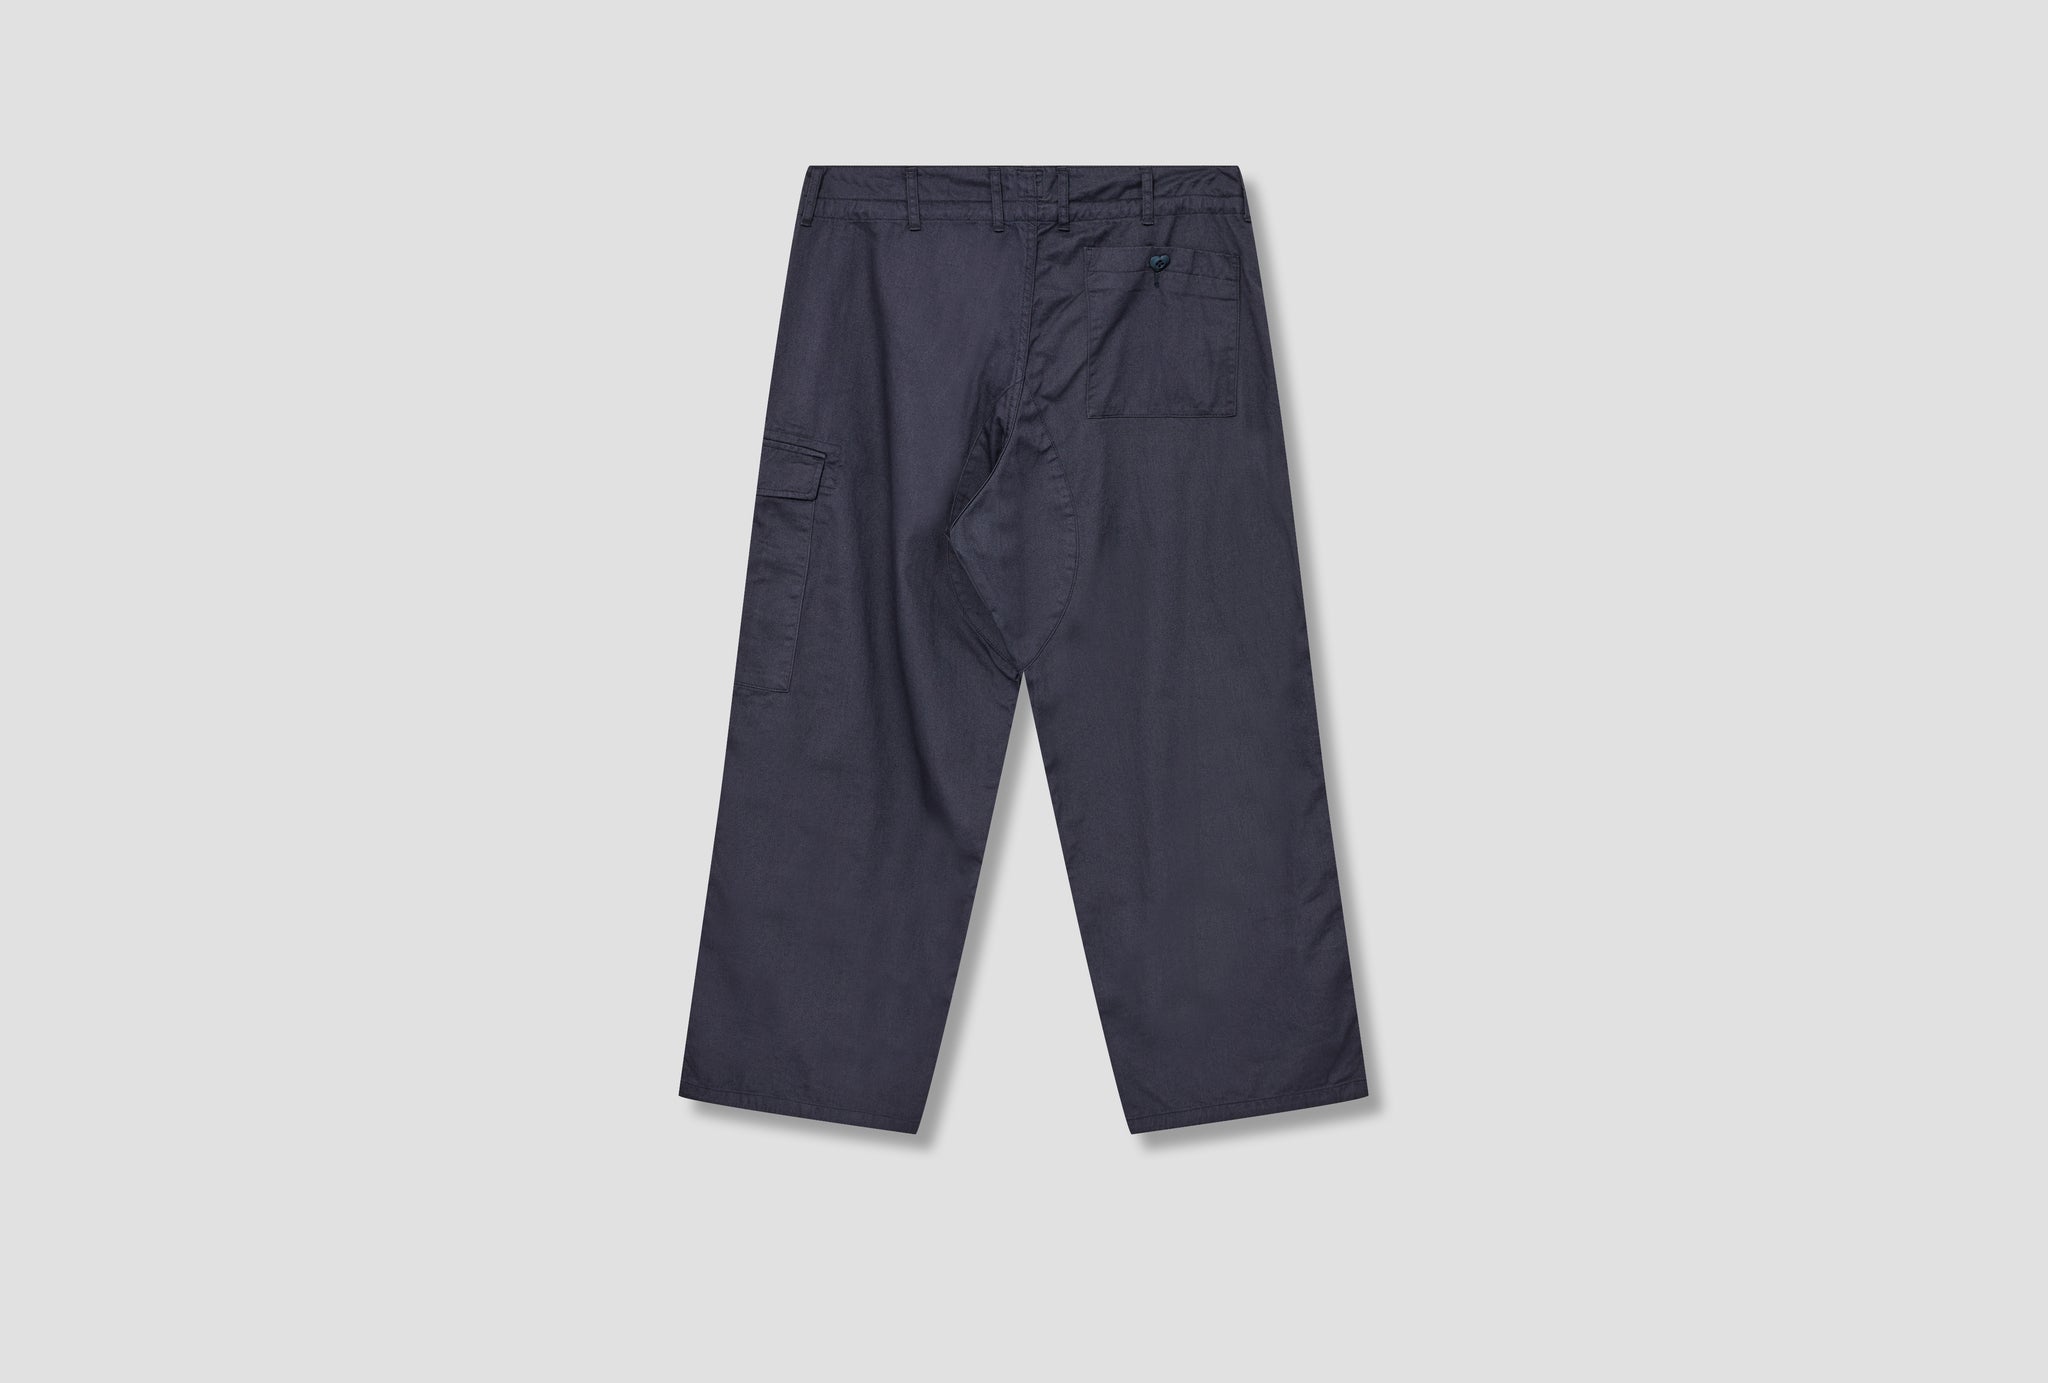 MILITARY EASY PANTS HM25PT003 Navy